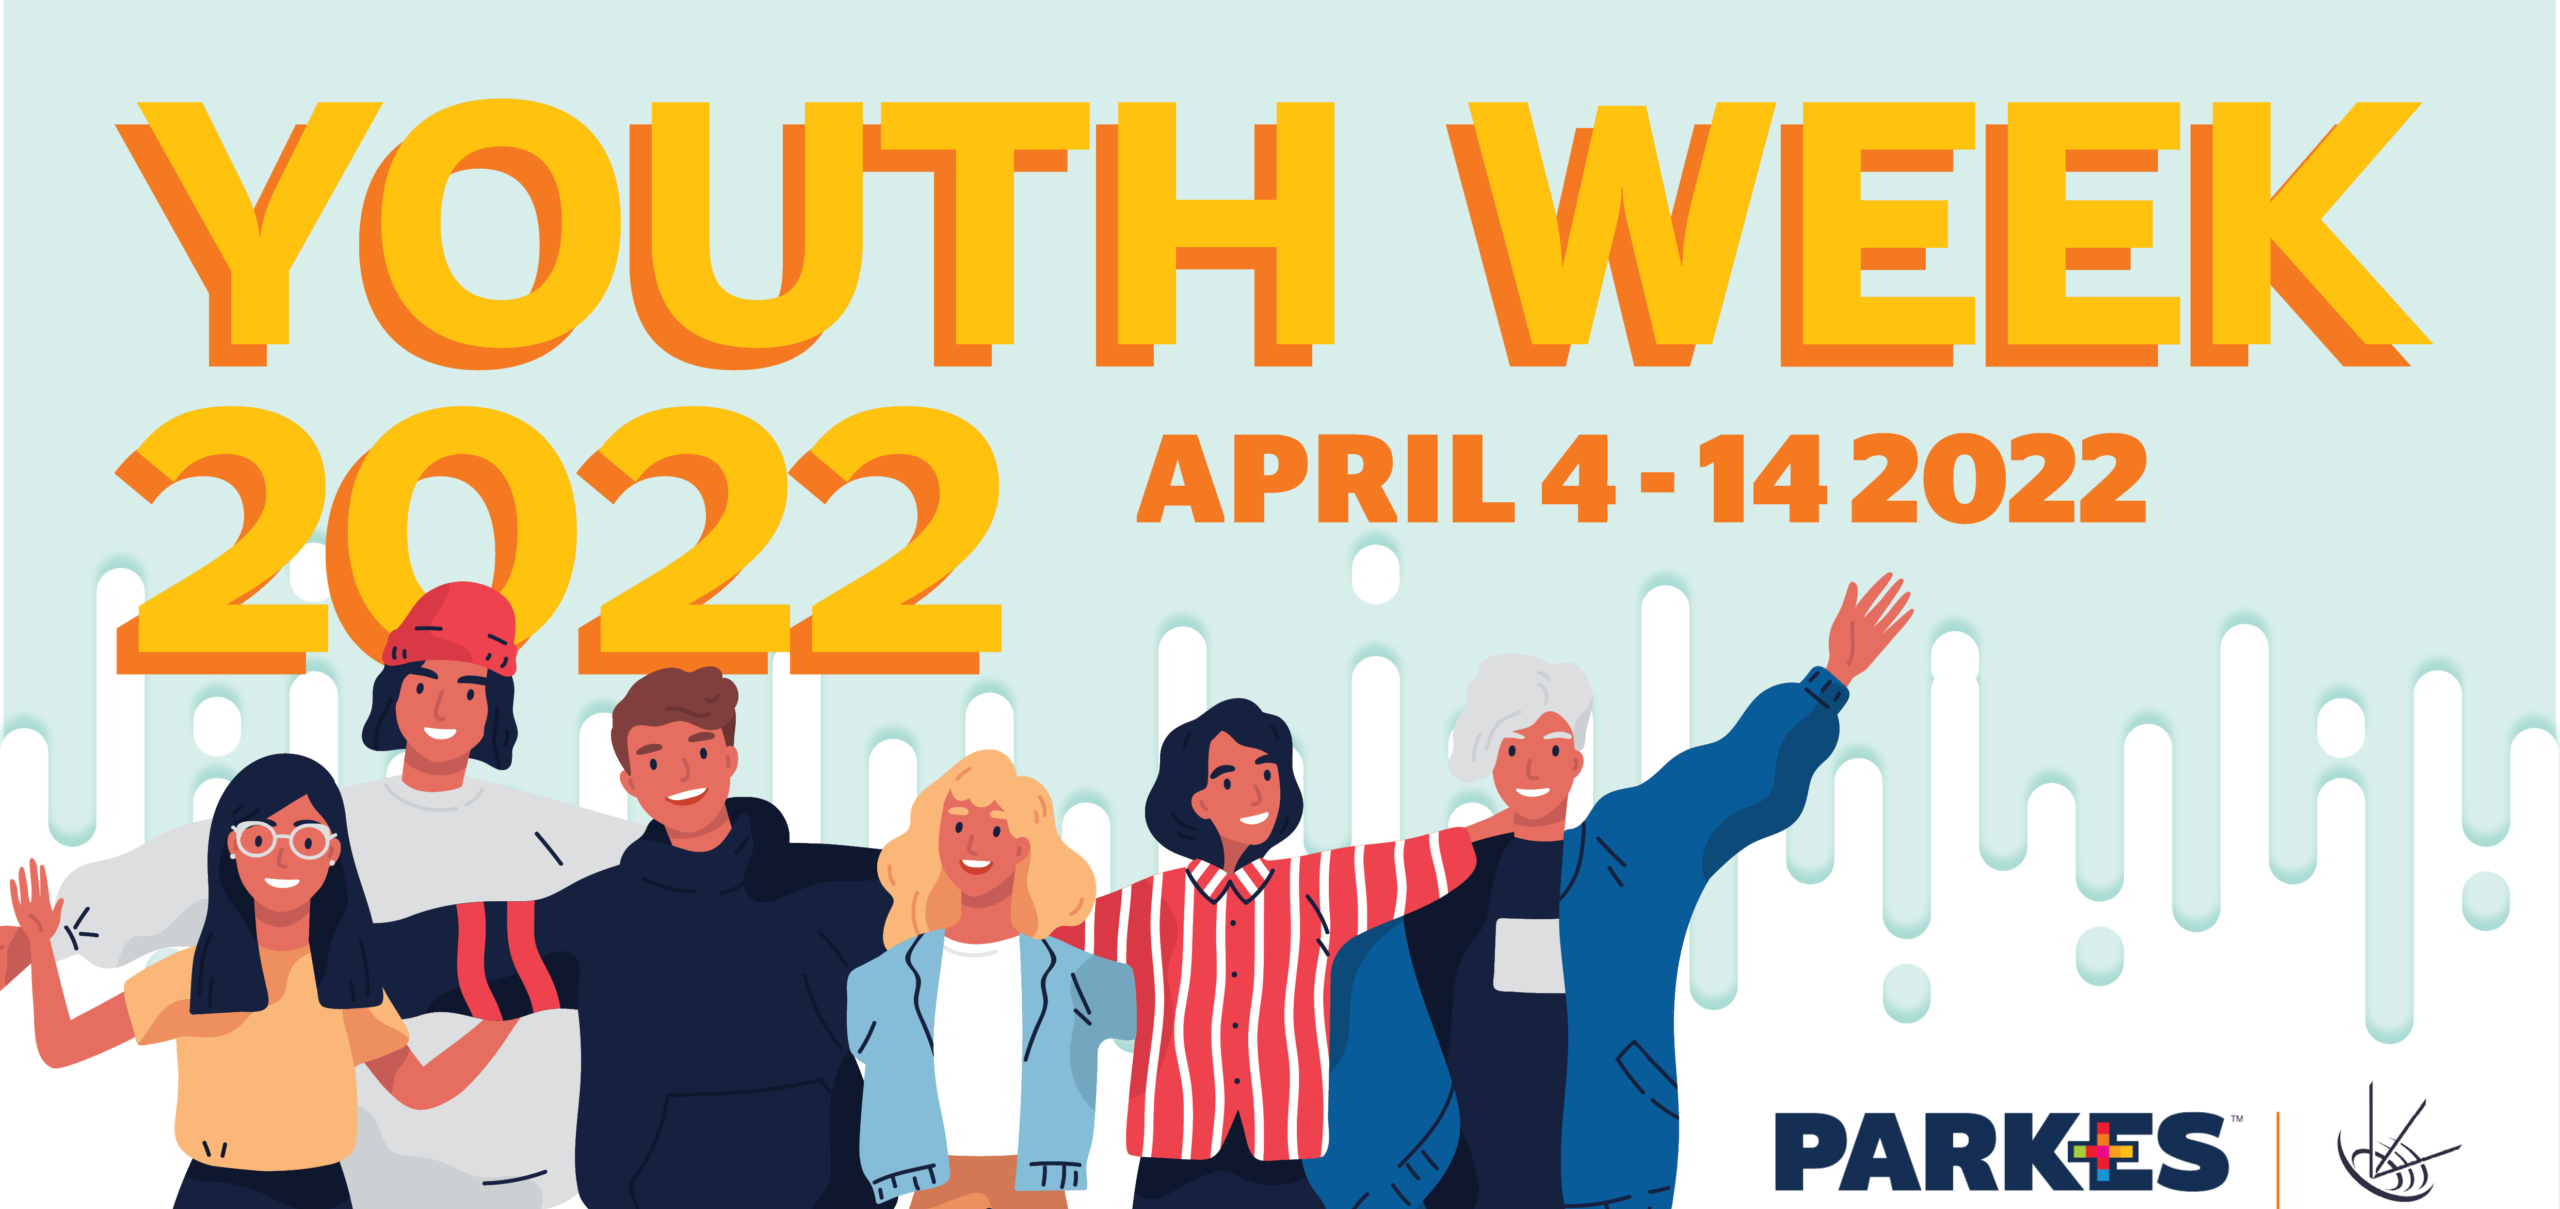 Youth Week 2022 in the Parkes Shire